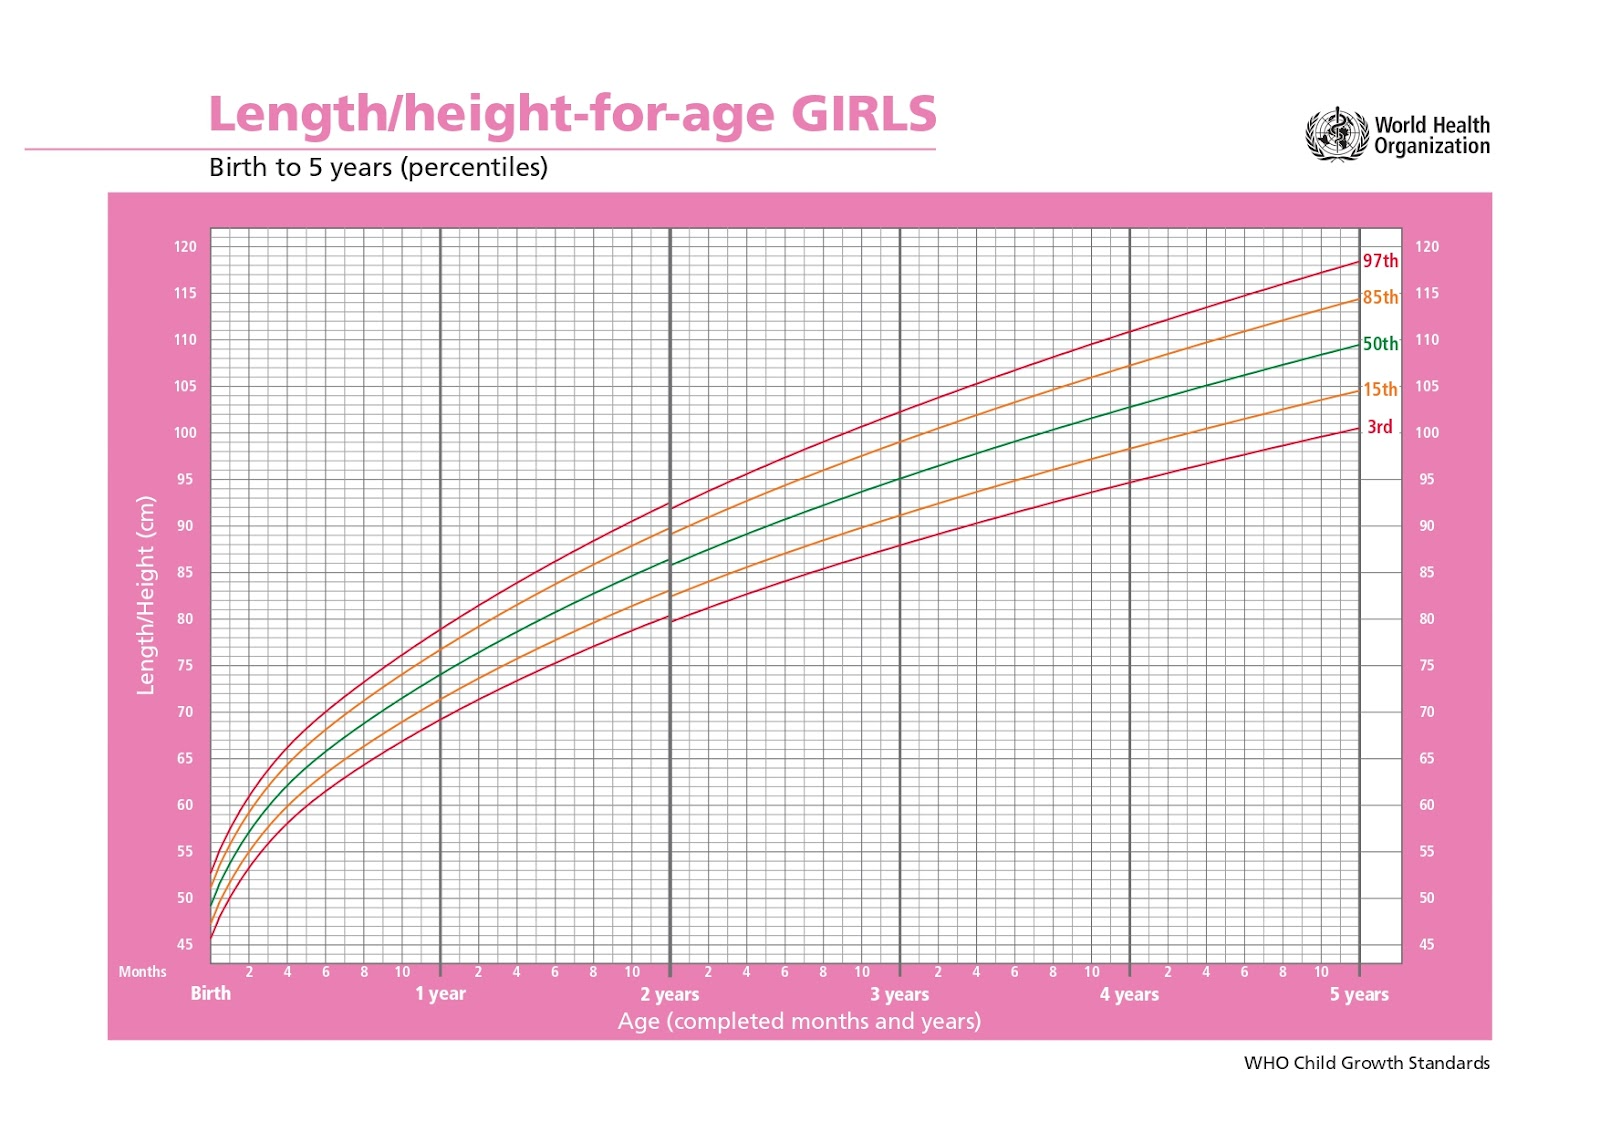 Length/Height for age Girls